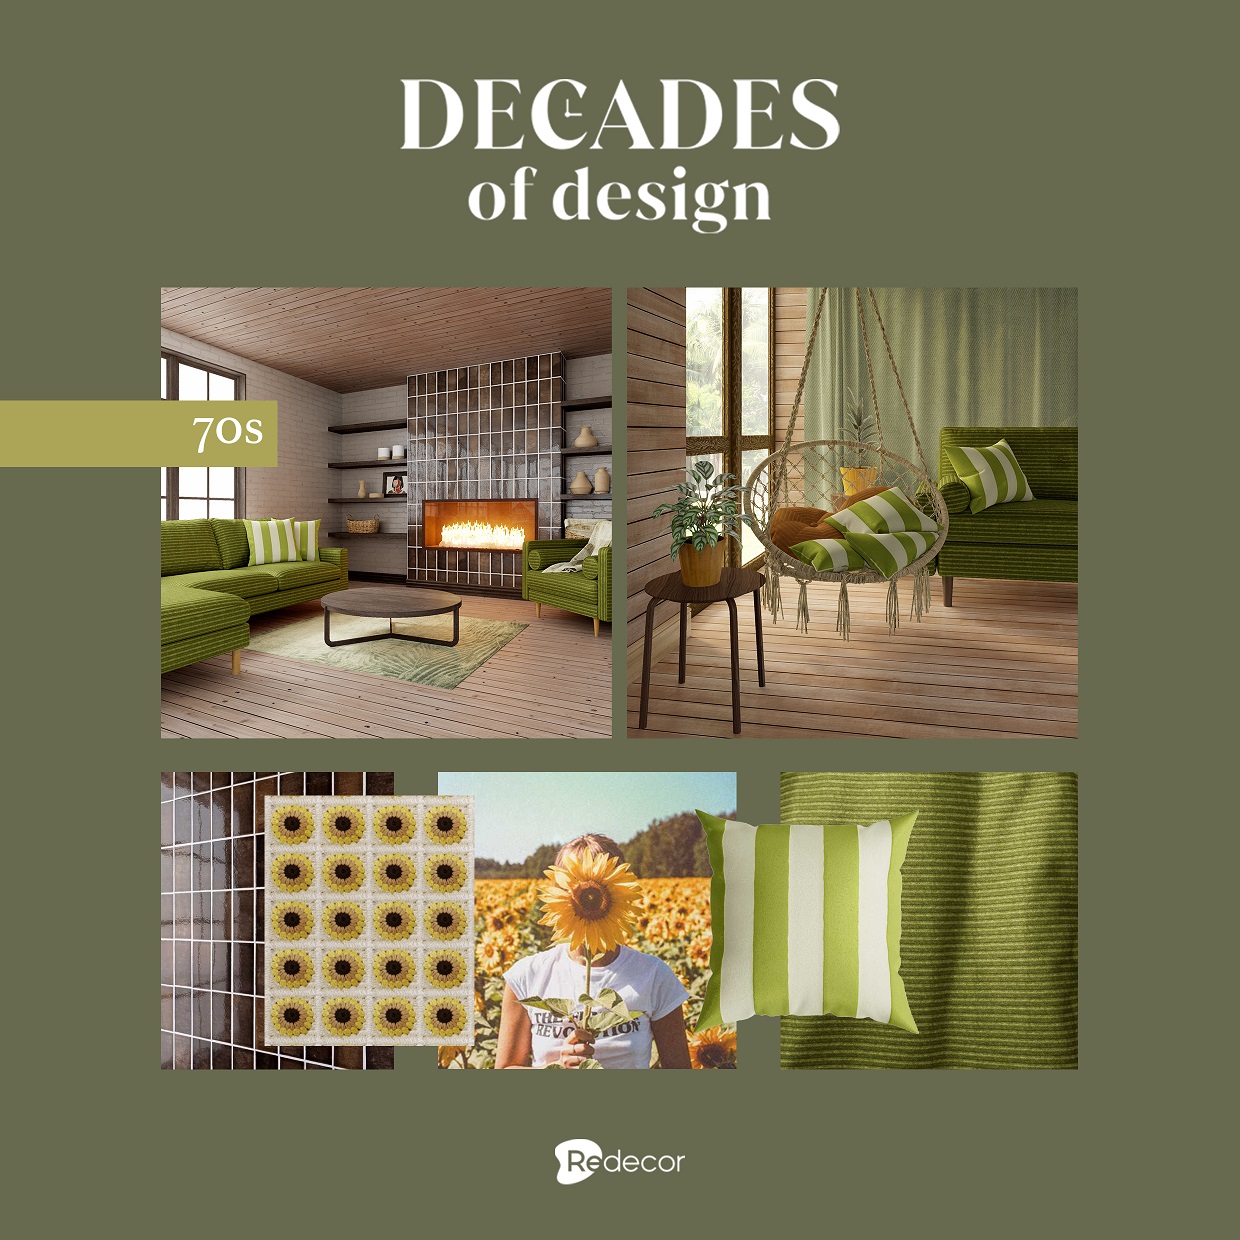 two room designs inspired by 70s interior design trends with season pass materials